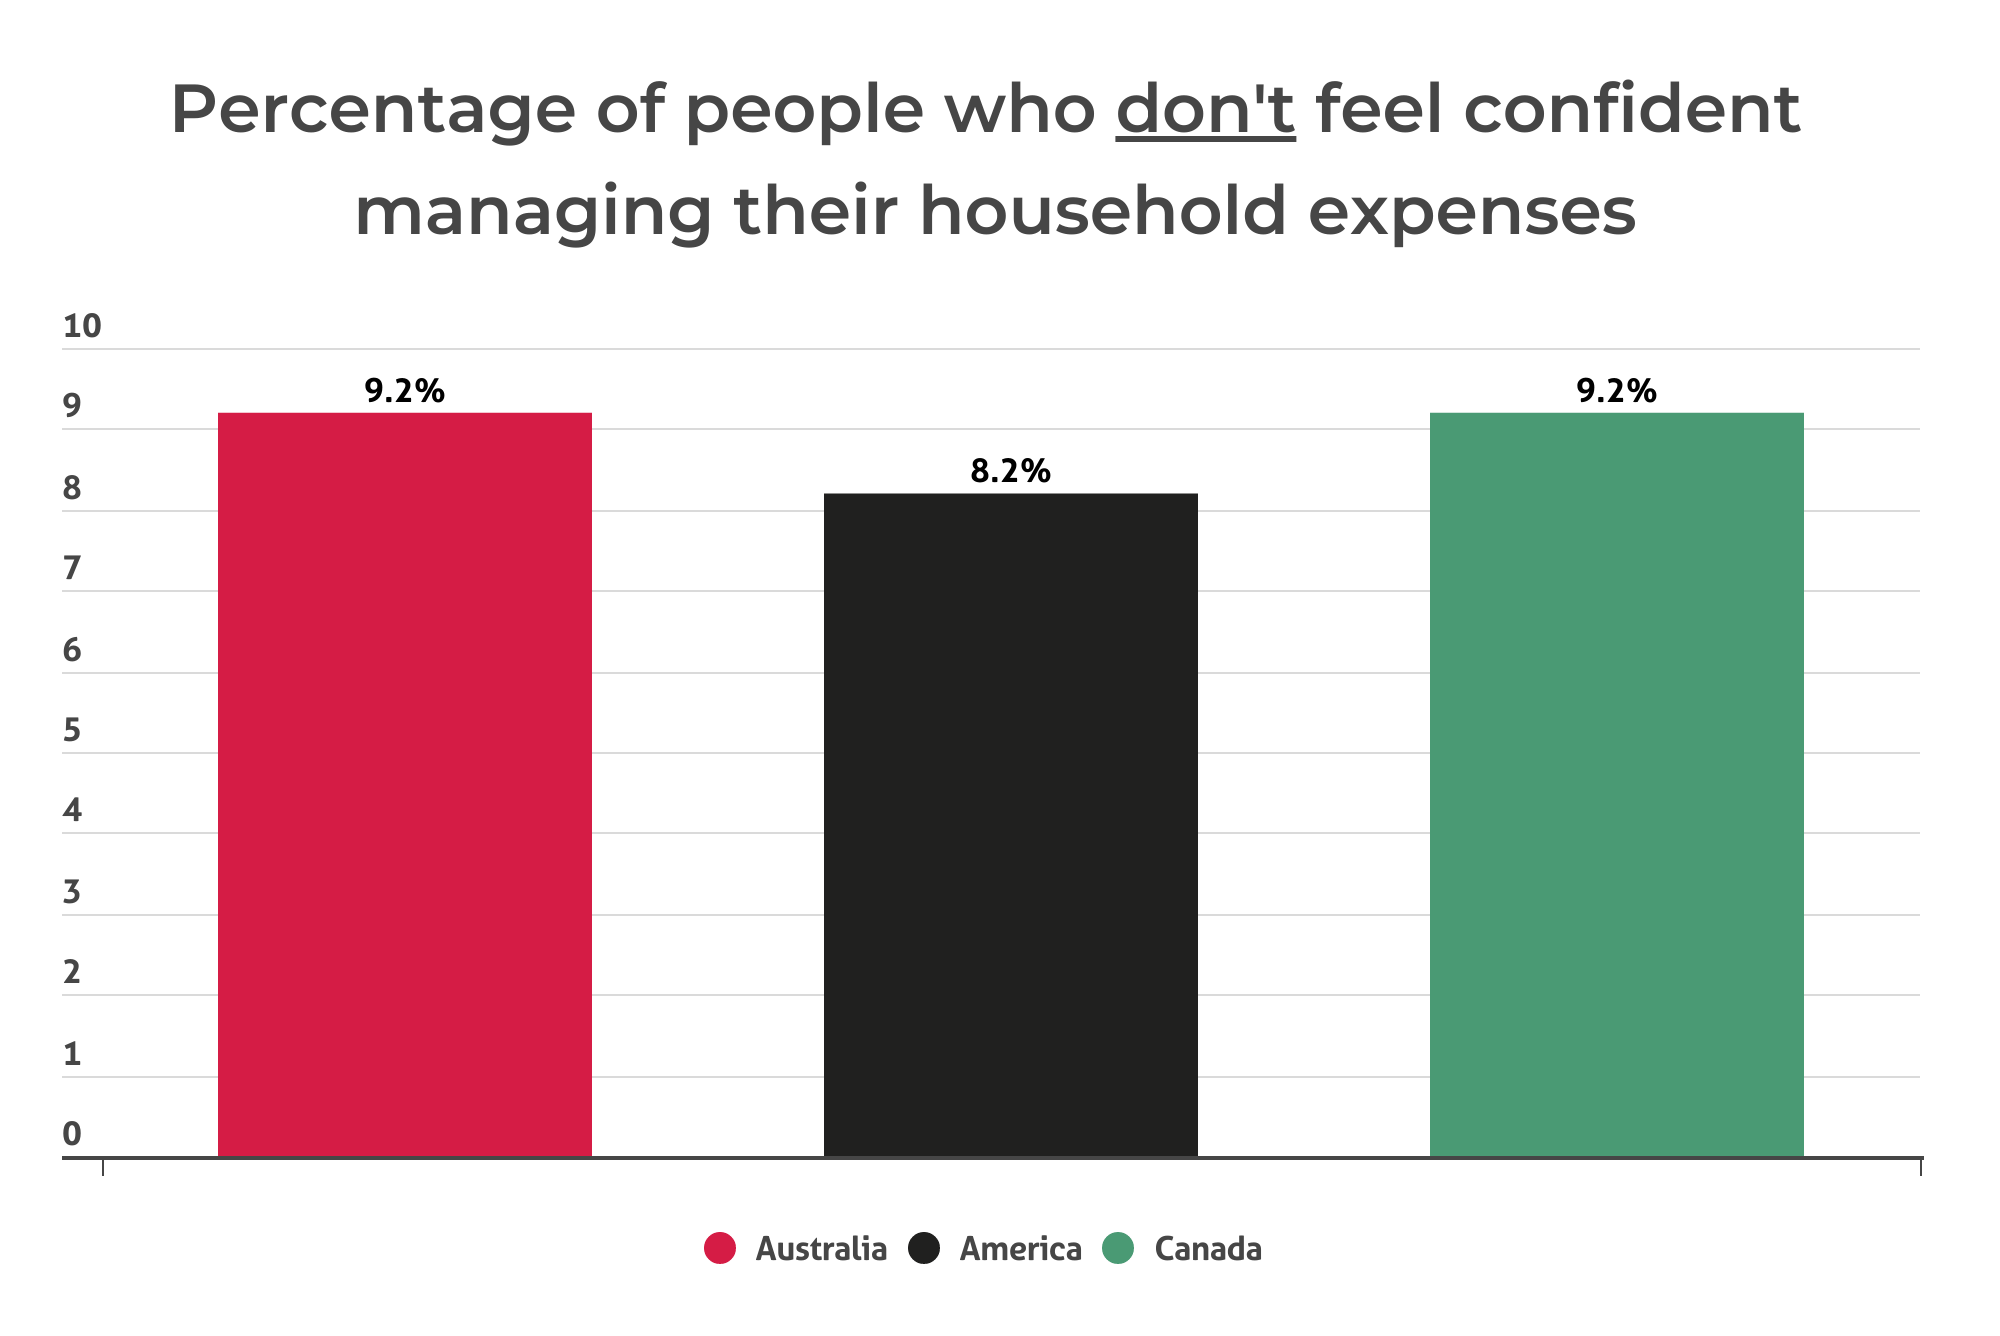 Graph showing the percentage of people that don't feel confident managing their household expenses in Australia, Canada and America.